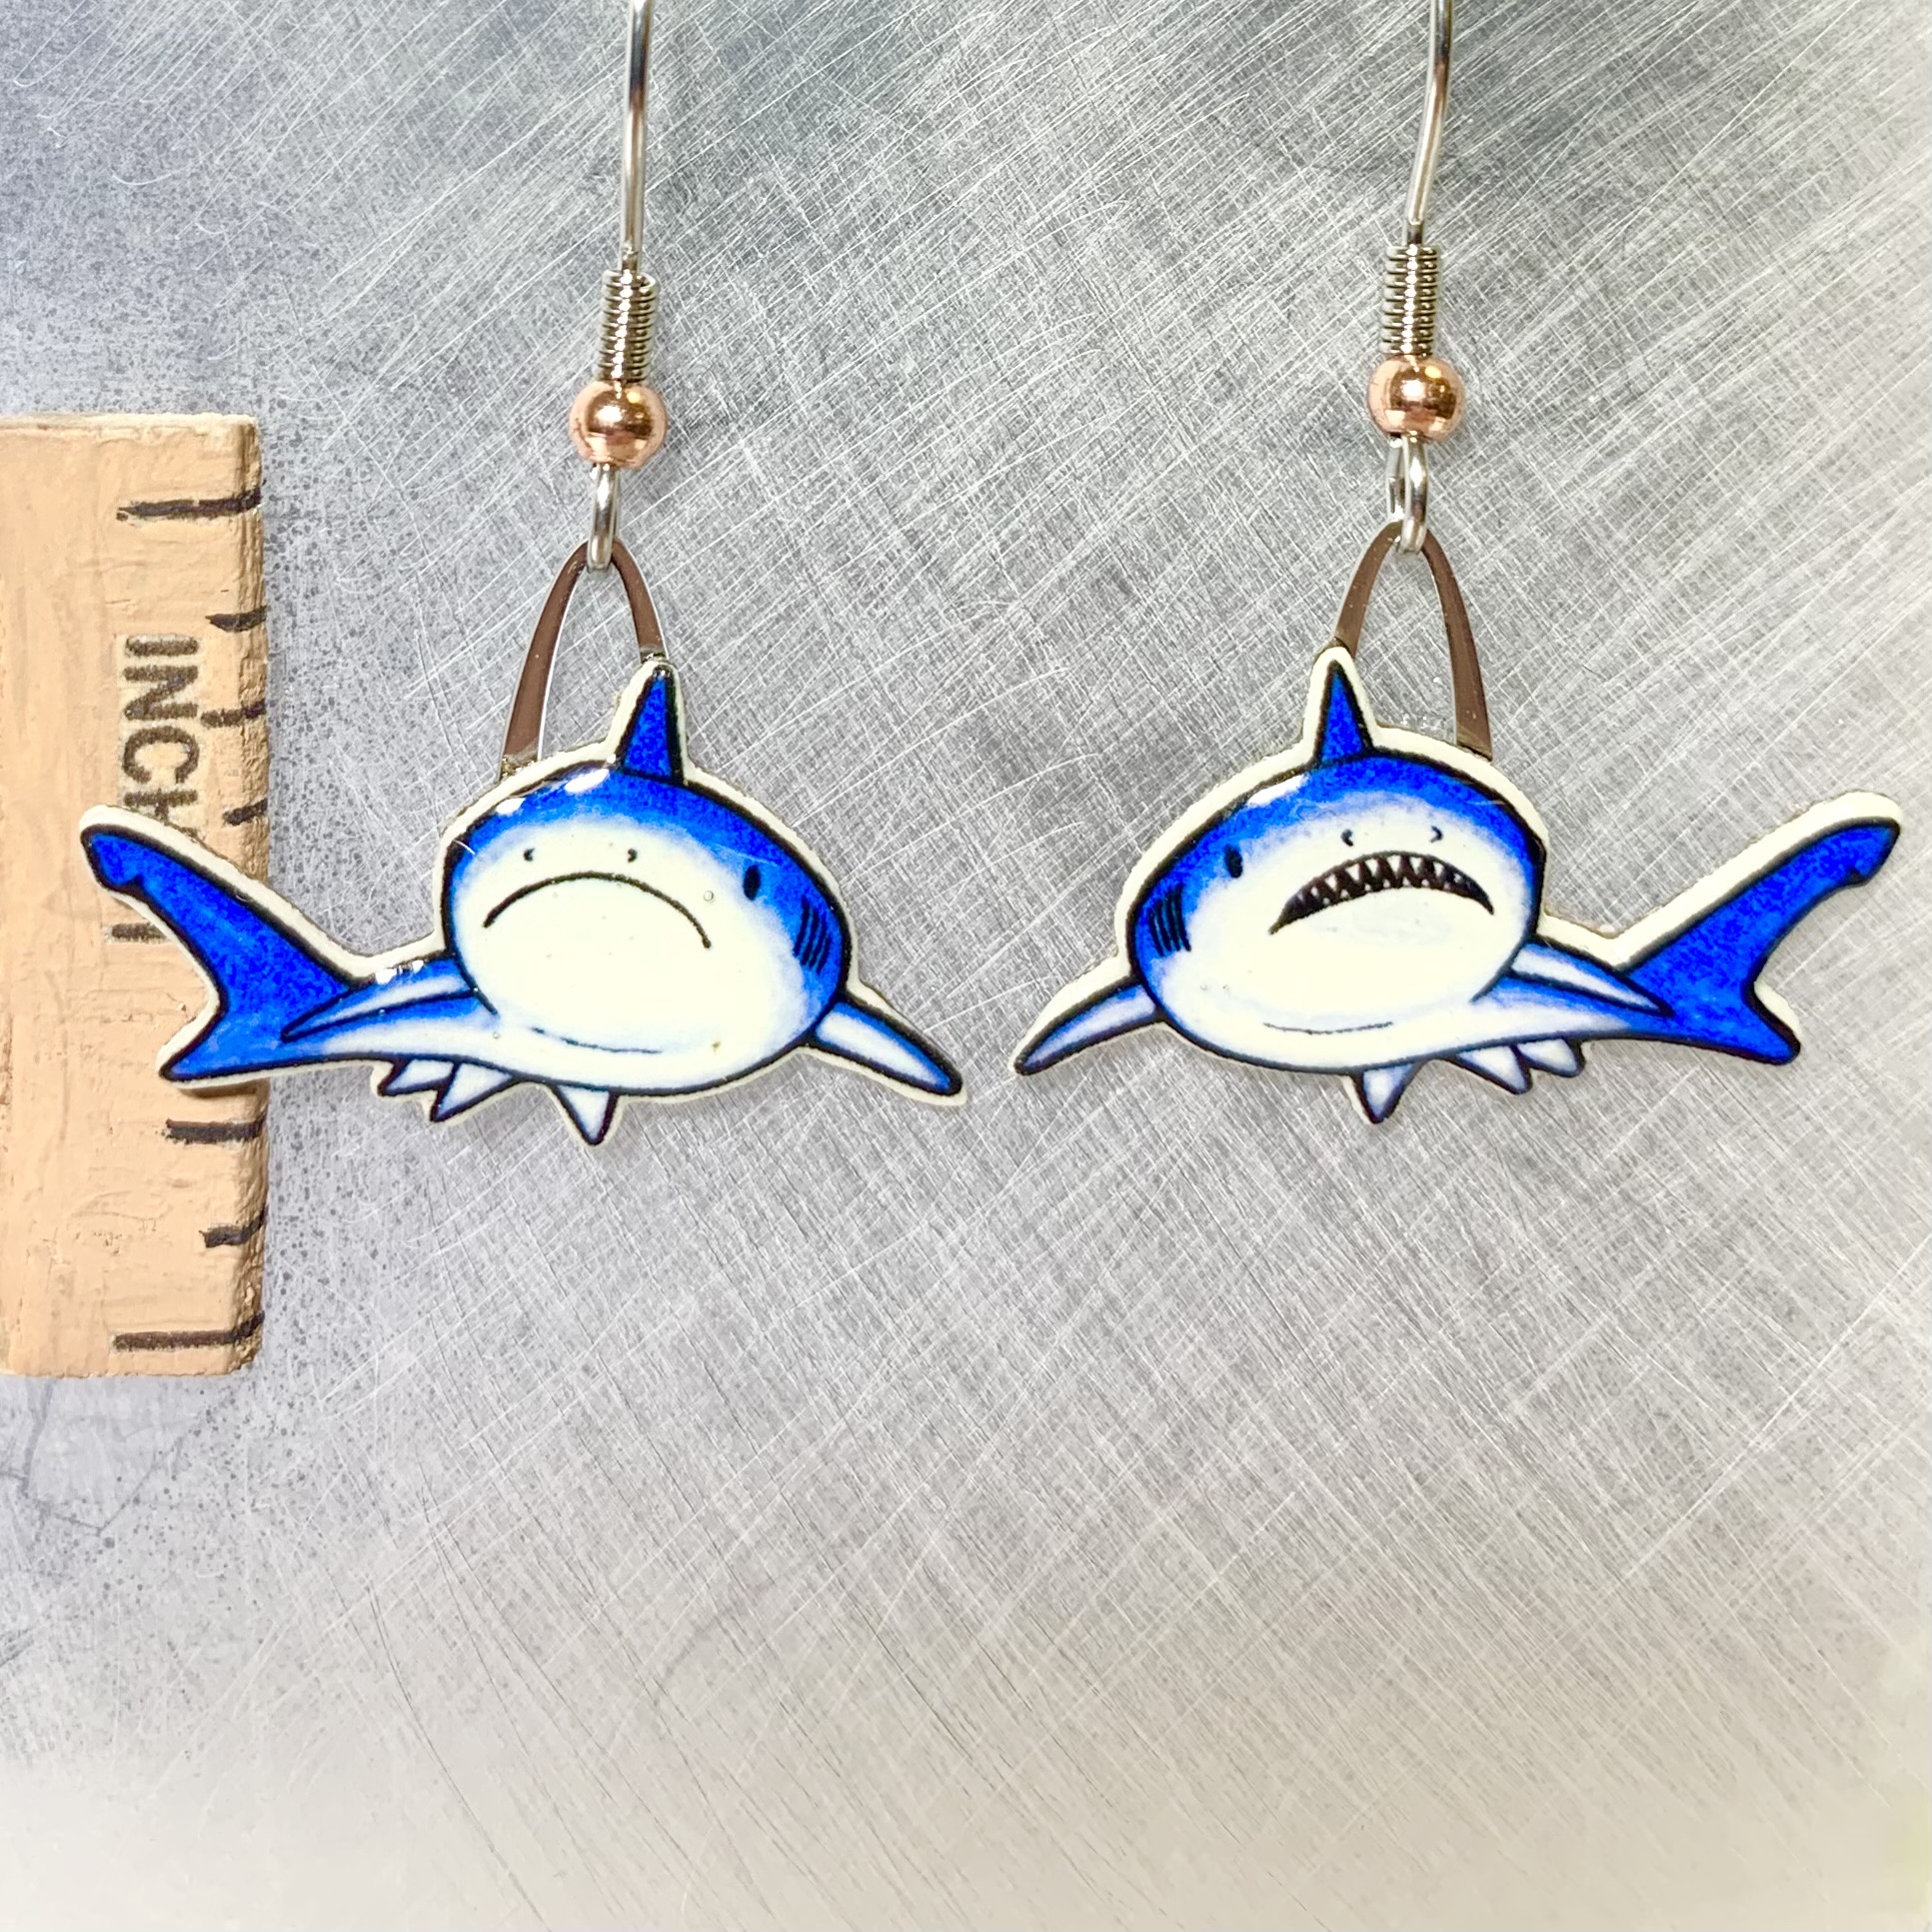 Picture shown is of 1 inch tall pair of earrings of the marine animal the Shark.